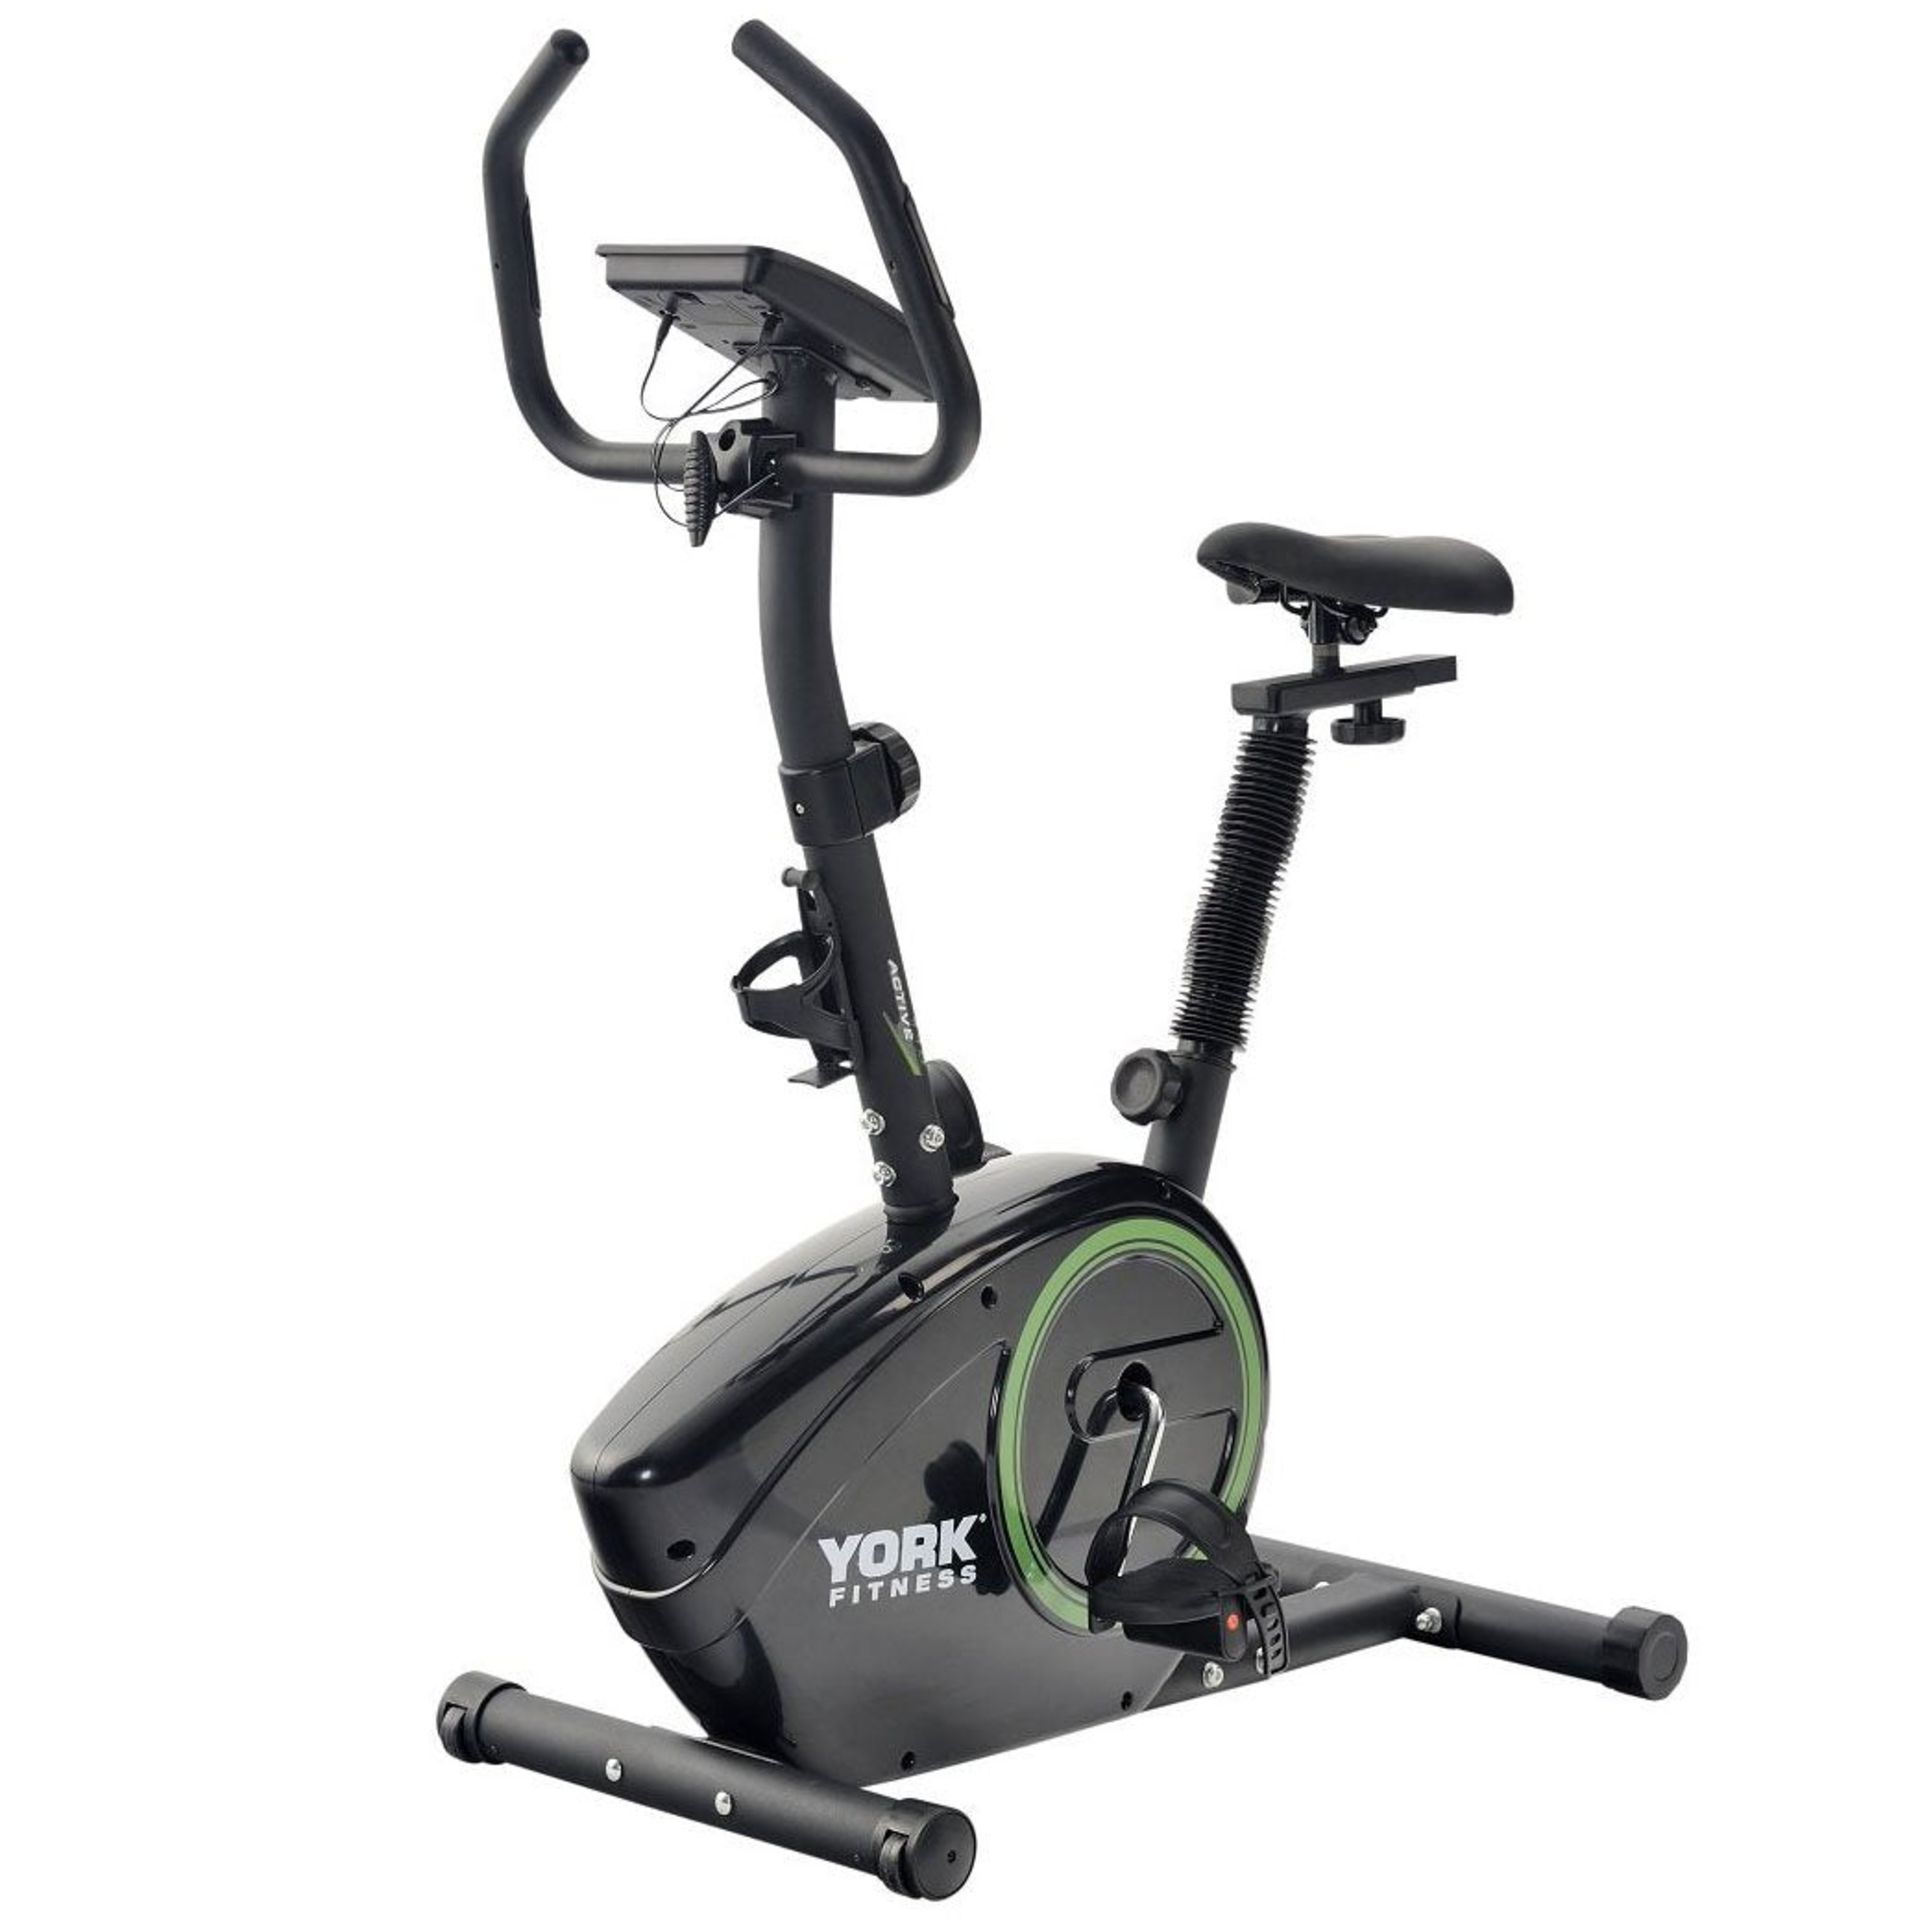 Sweatband York Active 110 Exercise Bike RRP 179.00 About the Product(s) York Active 110 Exercise